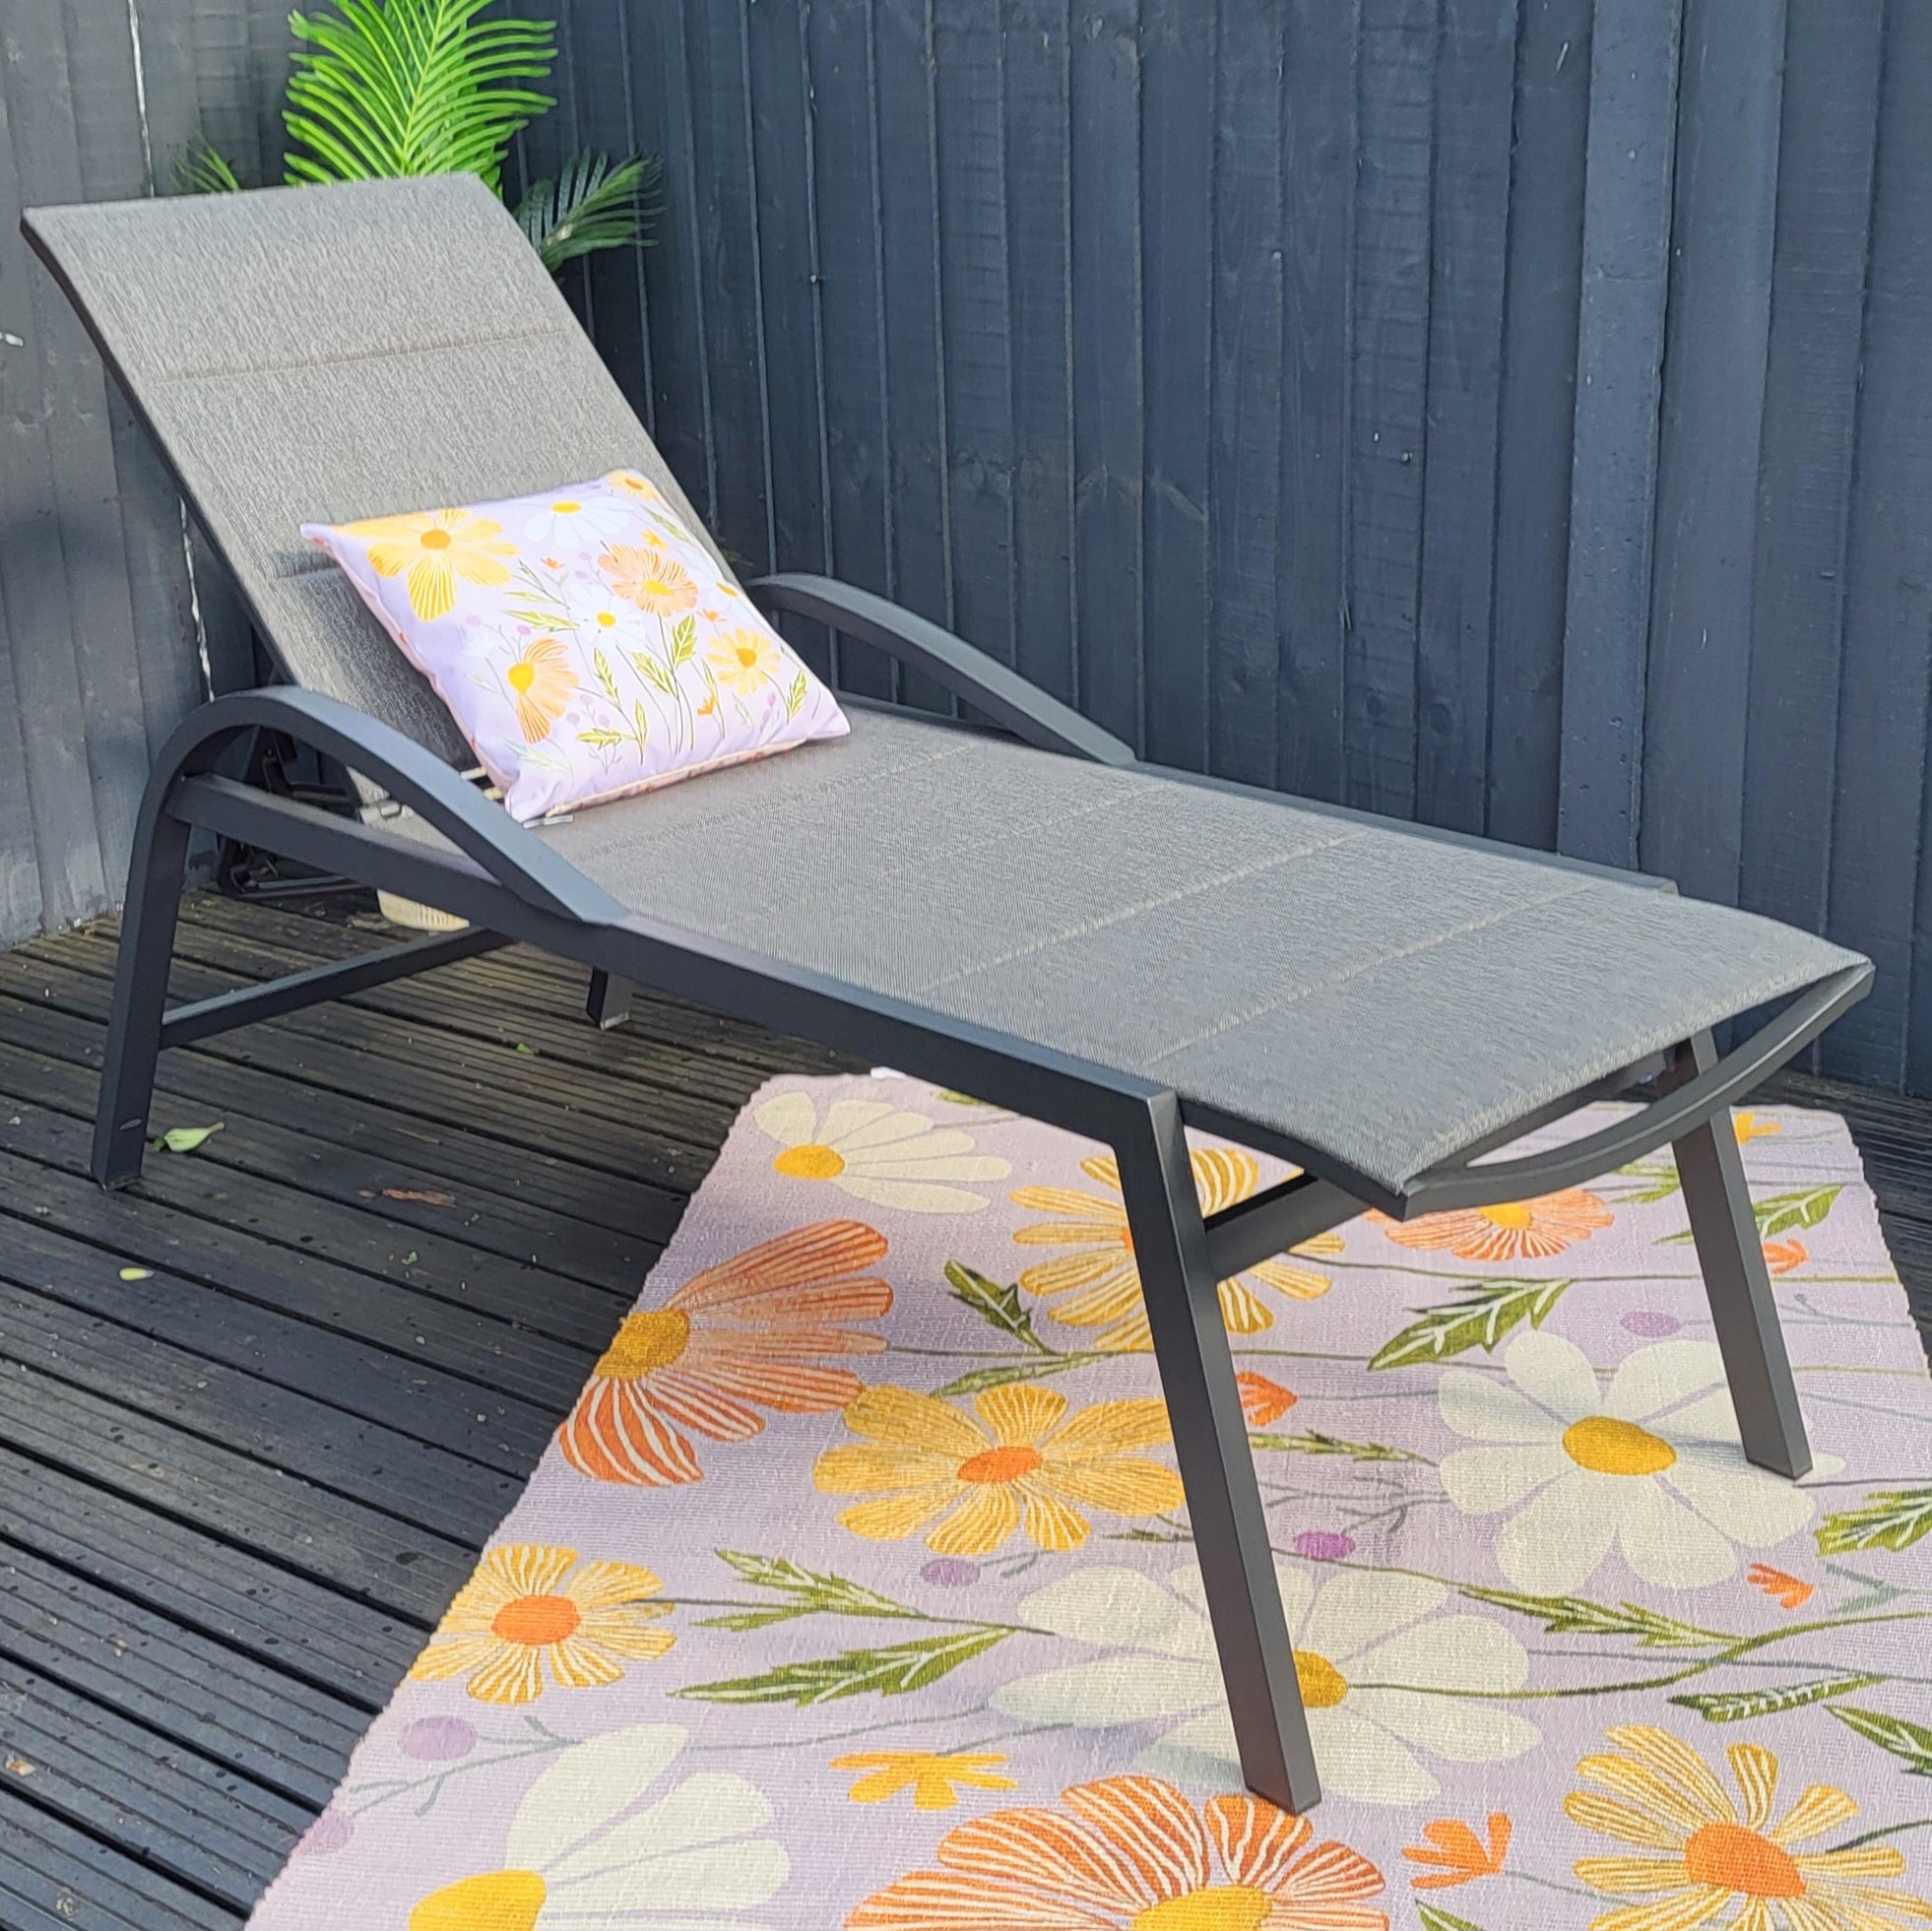 2 x Triton Sun loungers By Vila - DELIVERY ONLY WITHIN LOCAL AREA